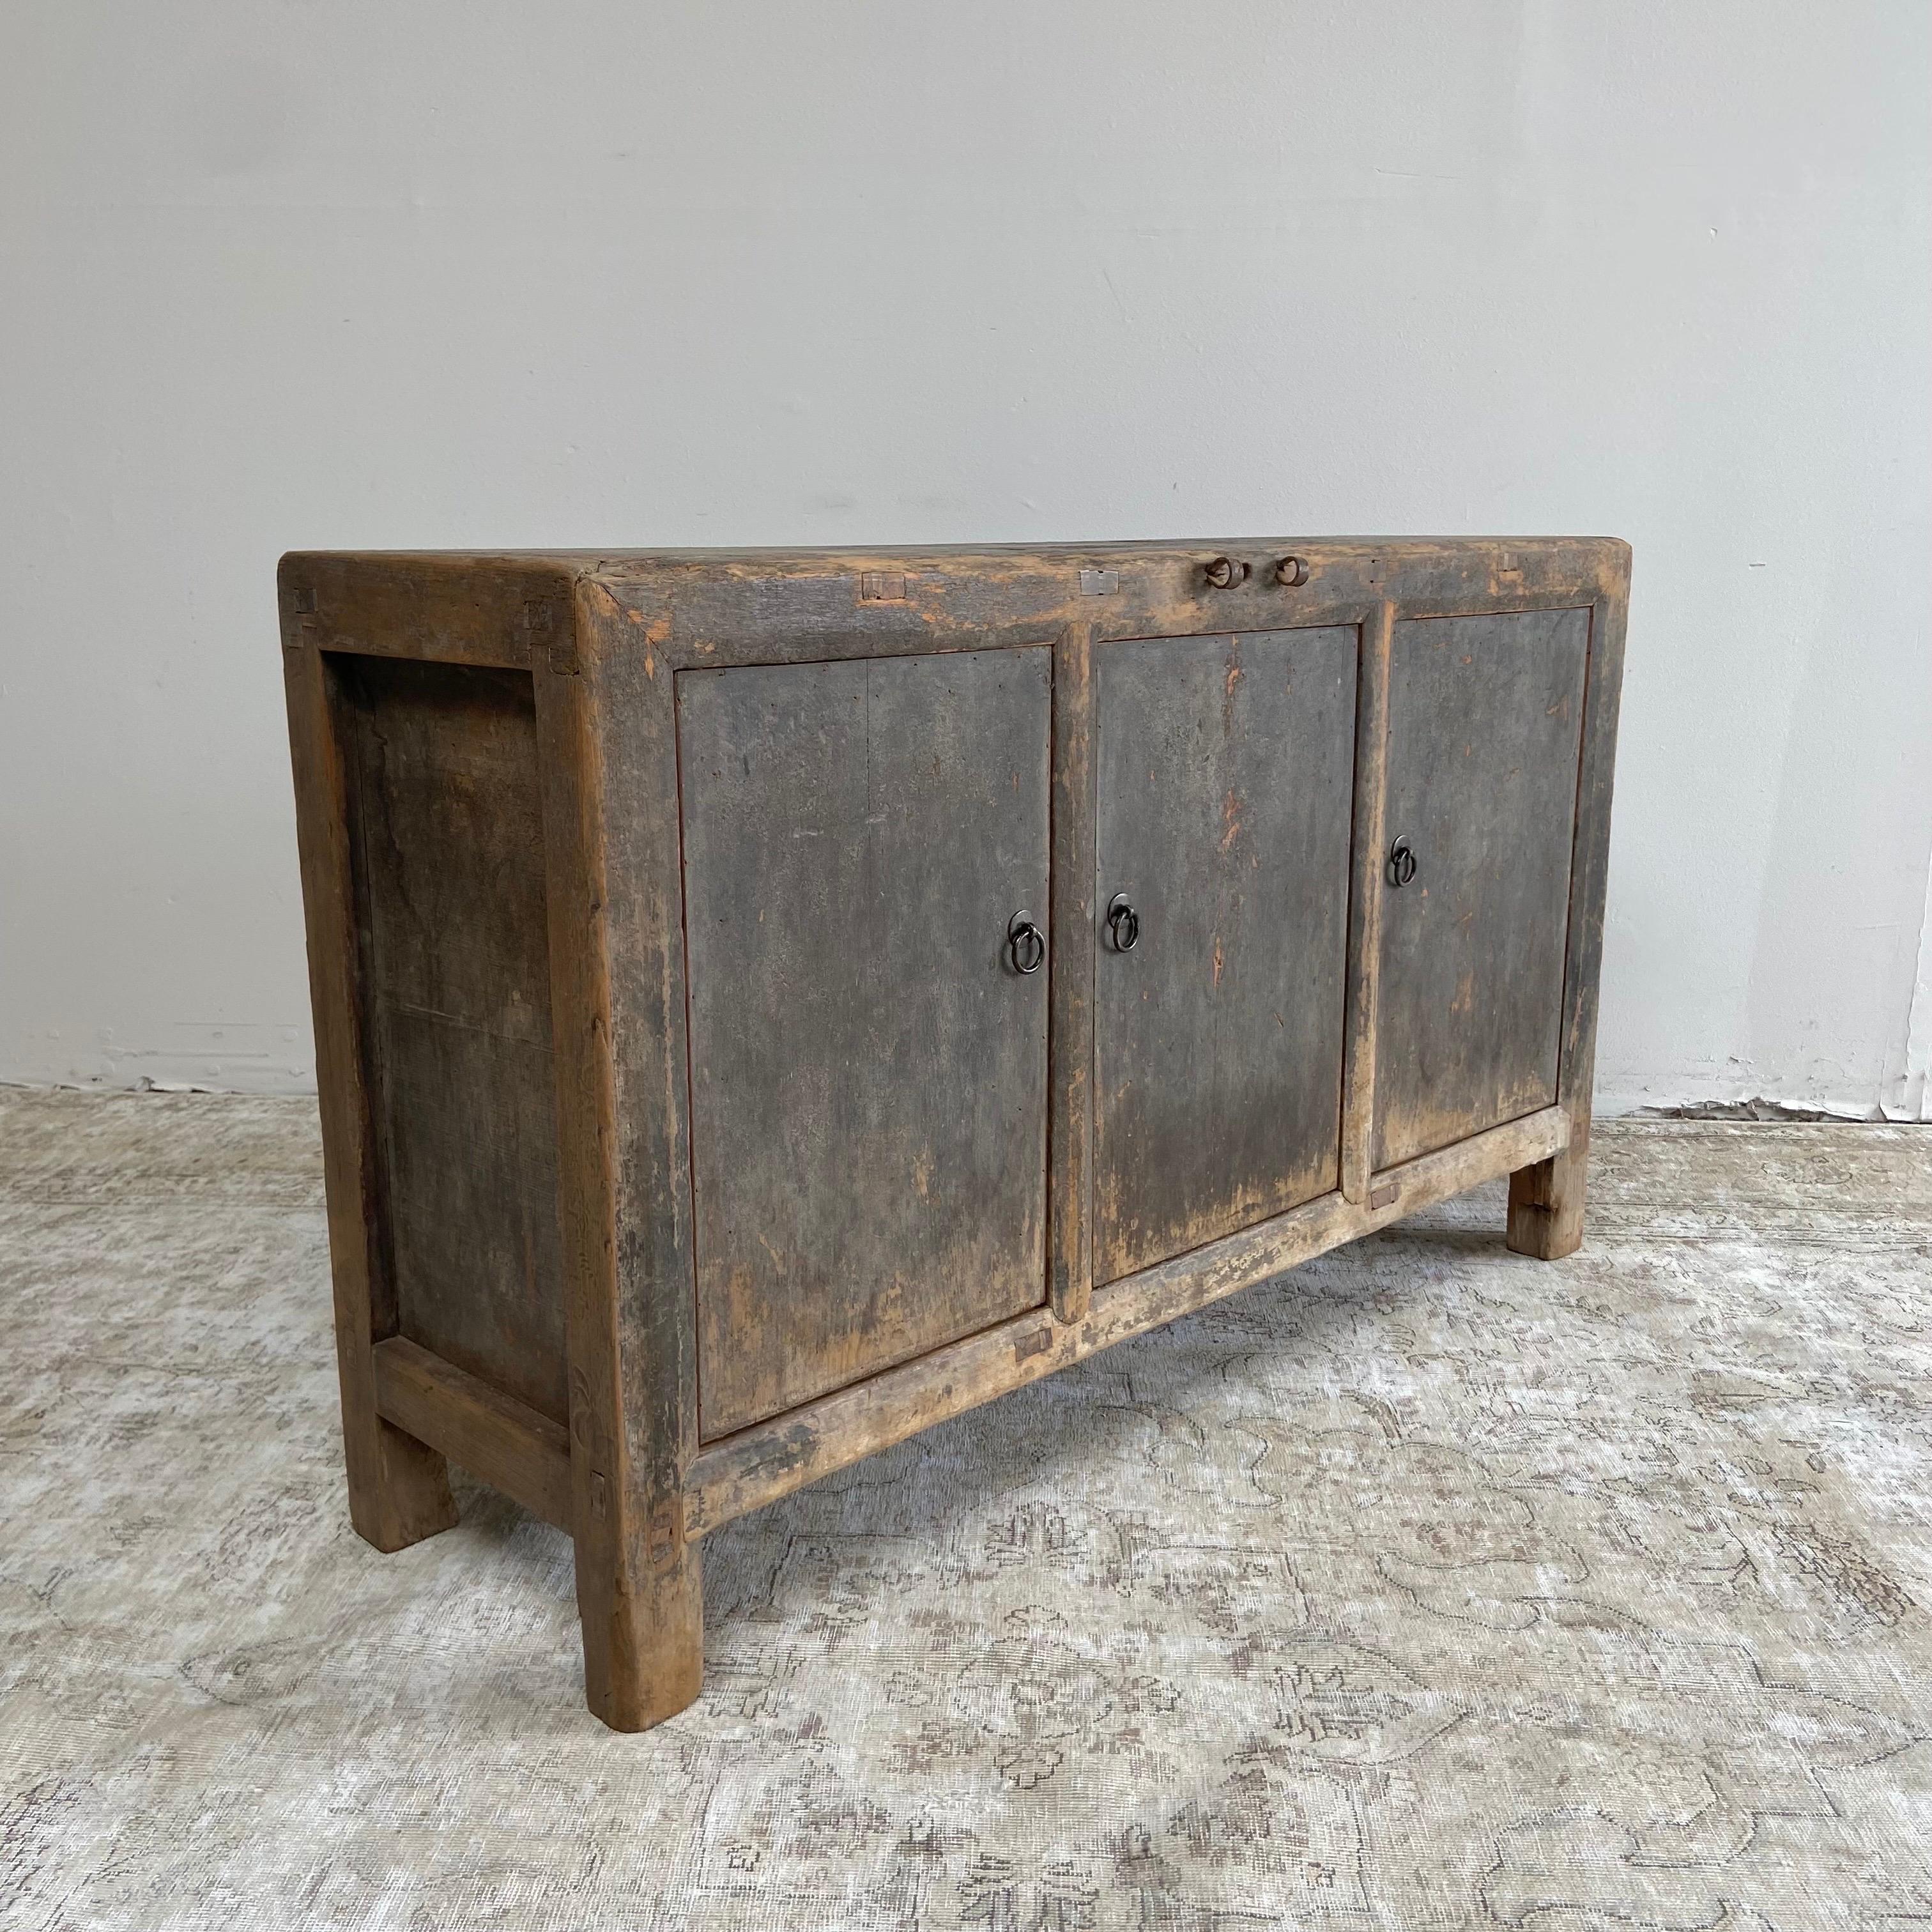 Vintage faded black cabinet 
size: 52”W x 16”D x 31-1/2”H
This faded black, charcoal cabinet has original distressed paint patina.
Constructed from vintage reclaimed timbers, with 3 working doors that open up to lots of great storage. This is a